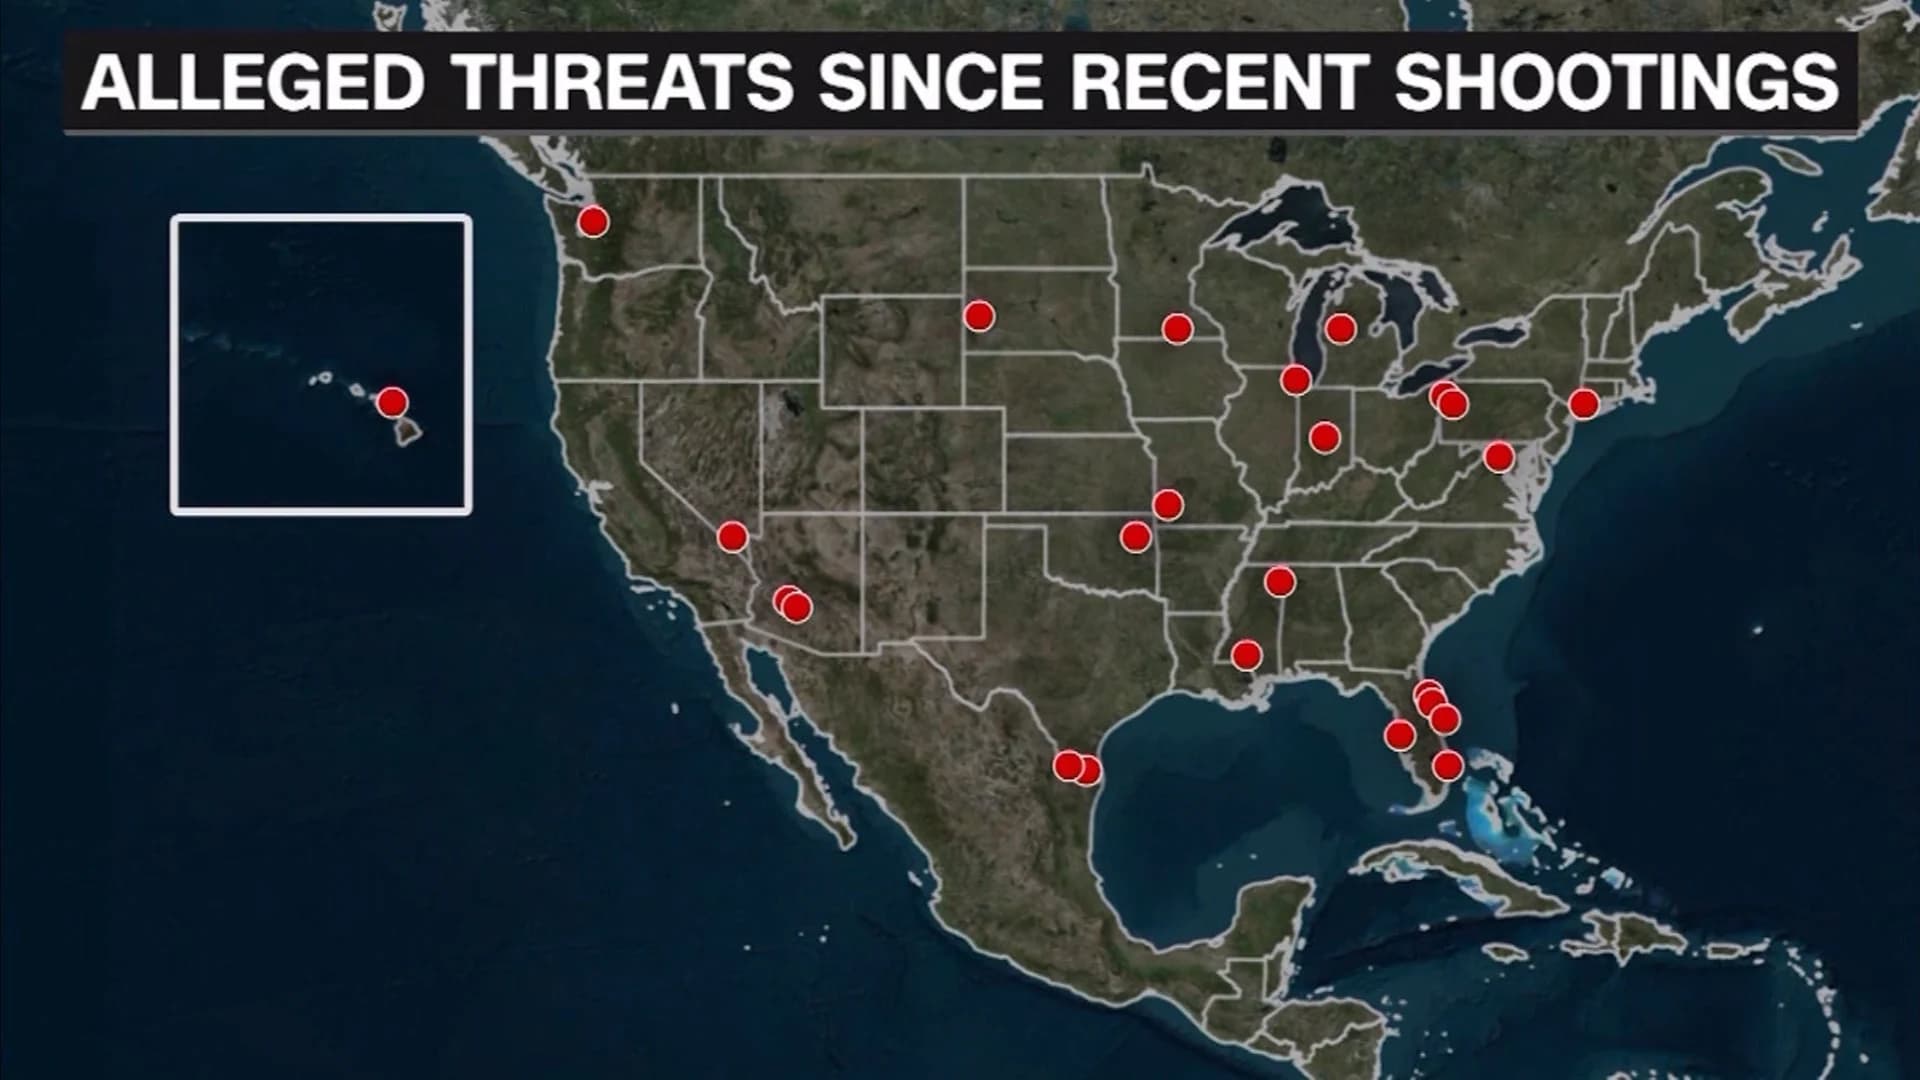 Report: At least 26 arrested across the country for threatening mass shootings in August